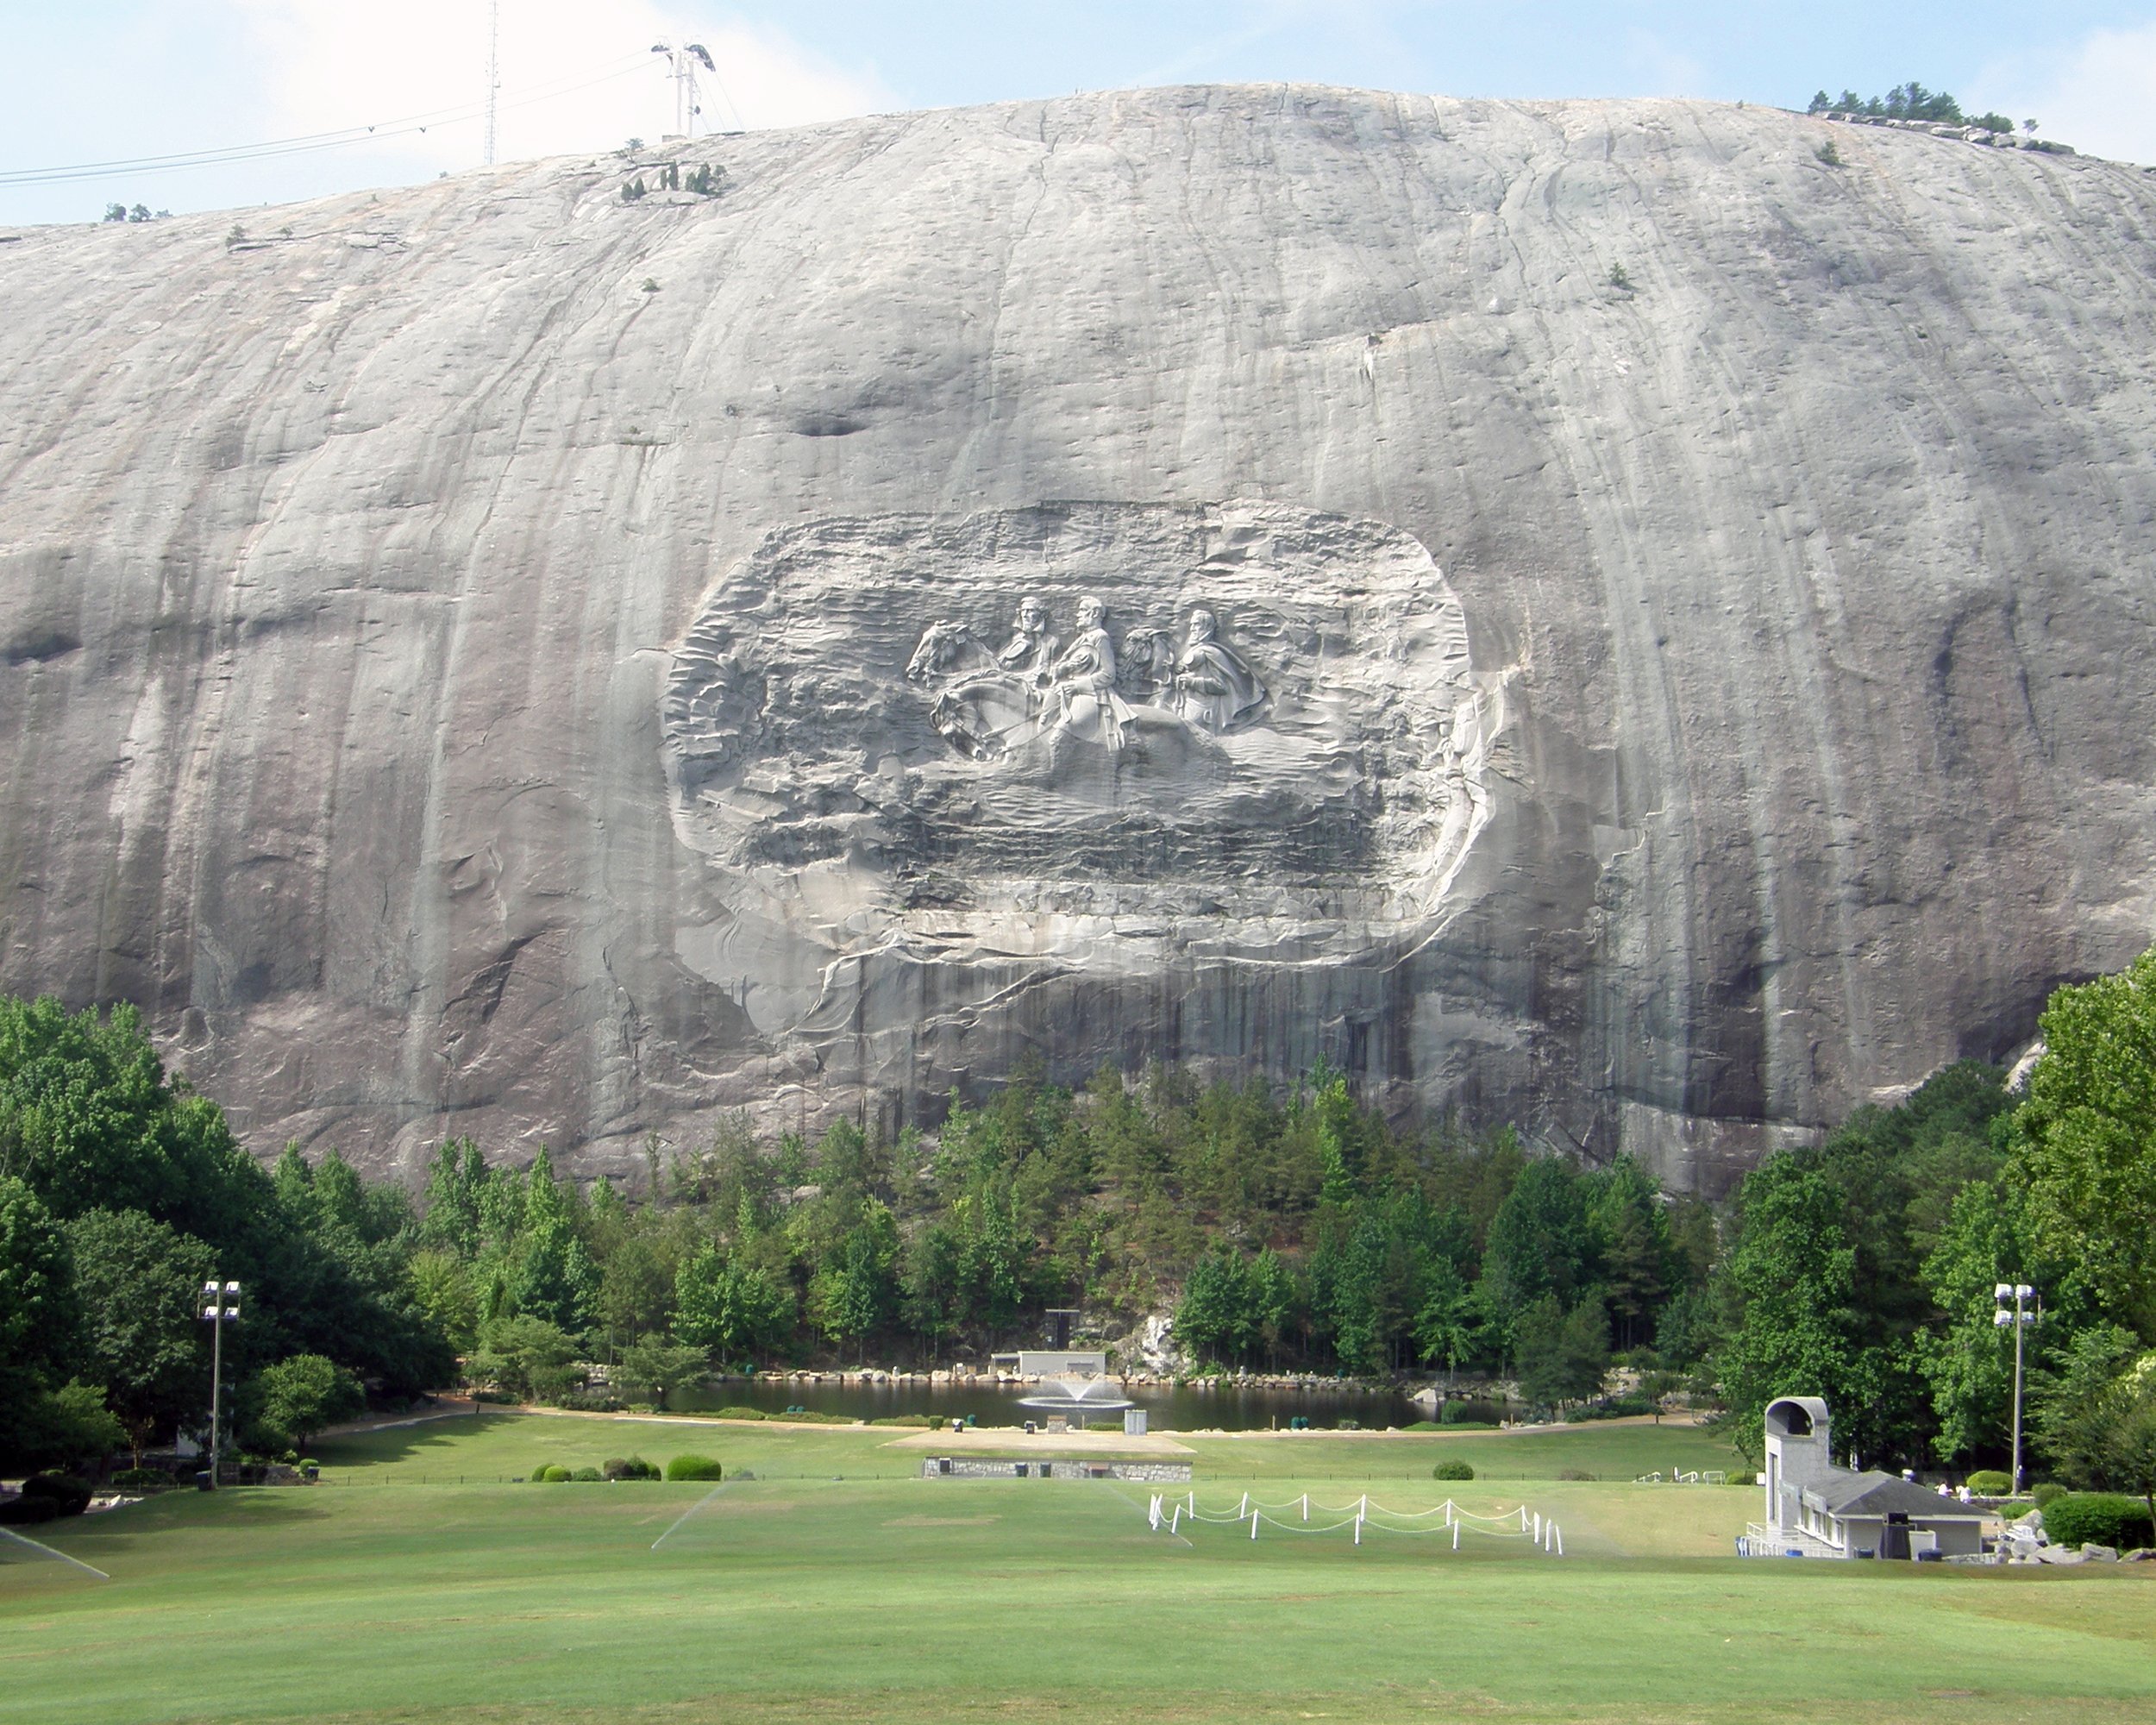 <p><strong>Location:</strong> Stone Mountain, Georgia <br><strong>Era:</strong> Late 1700s-1800s <br><strong>What to do:</strong> The Historic Square at Stone Mountain Park showcases classic antebellum architecture from the late 1700s and 1800s, and visitors can enjoy <a href="https://www.stonemountainpark.com/Activities/Attractions/Historic-Square">a scenic train ride</a> pulled by a 1940s locomotive.<br><strong>Cost:</strong> $35 for adults; $30 for children</p>